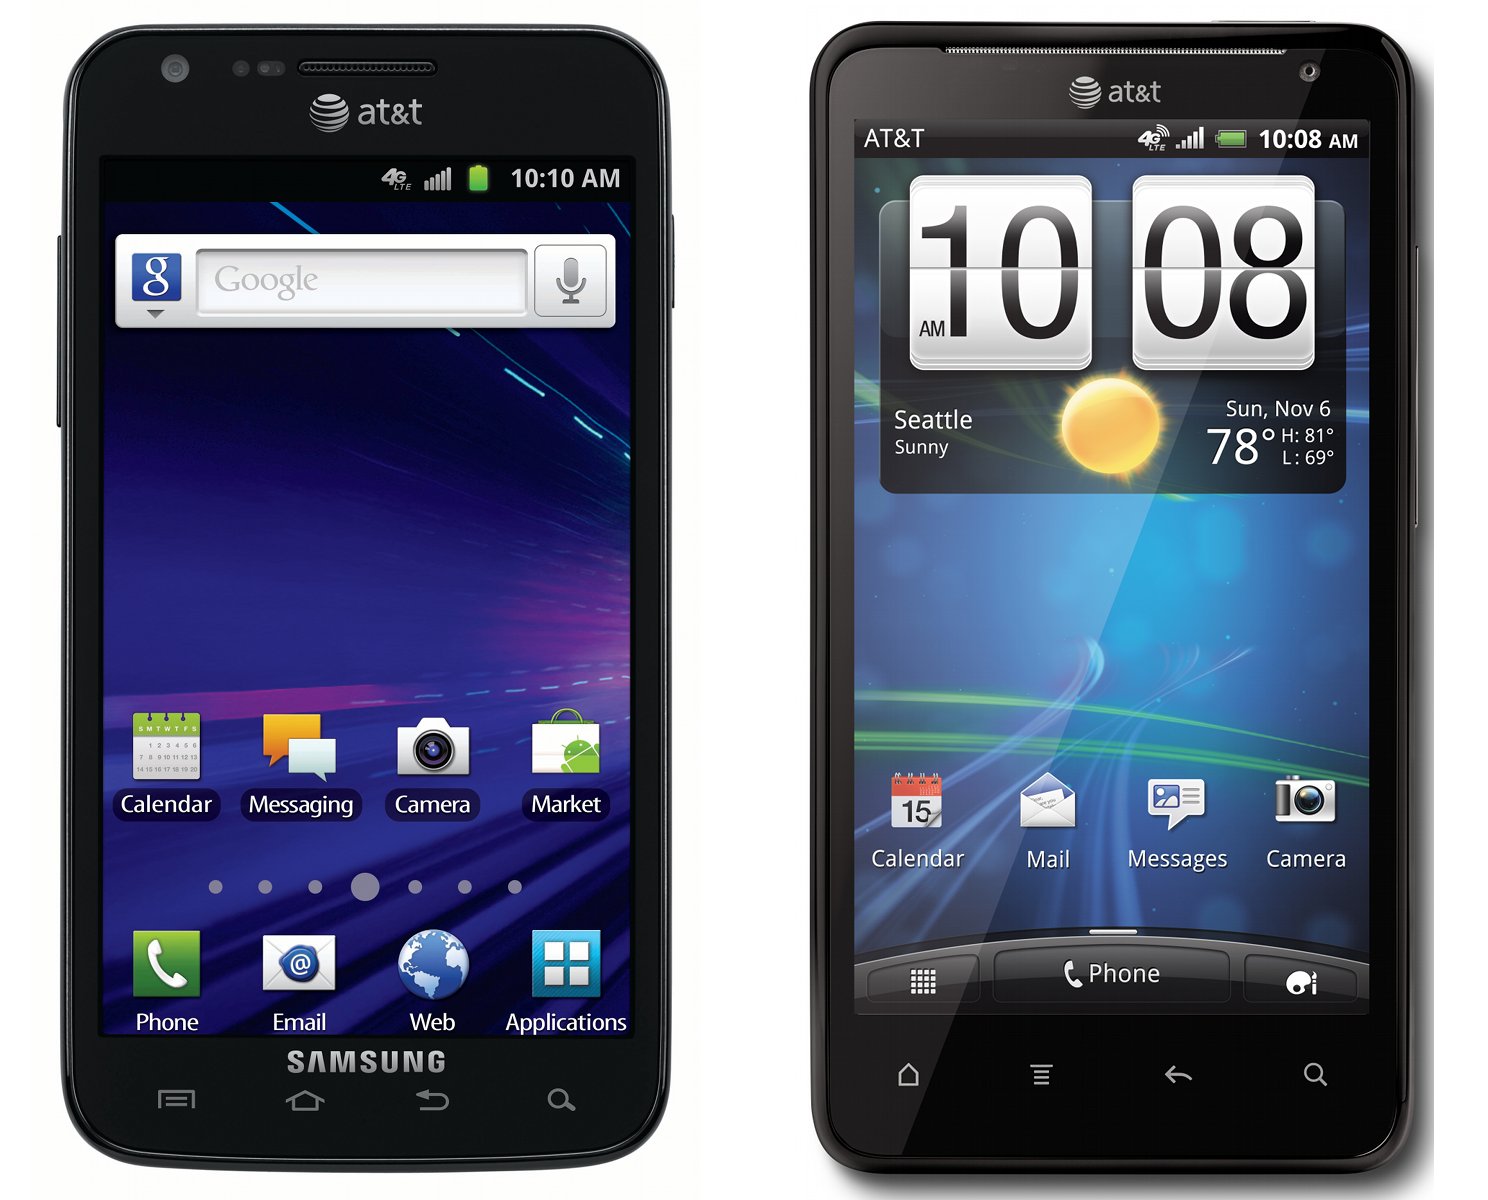 Samsung Galaxy S II Skyrocket and HTC Vivid: ATamp;T39;s First LTE Phones 